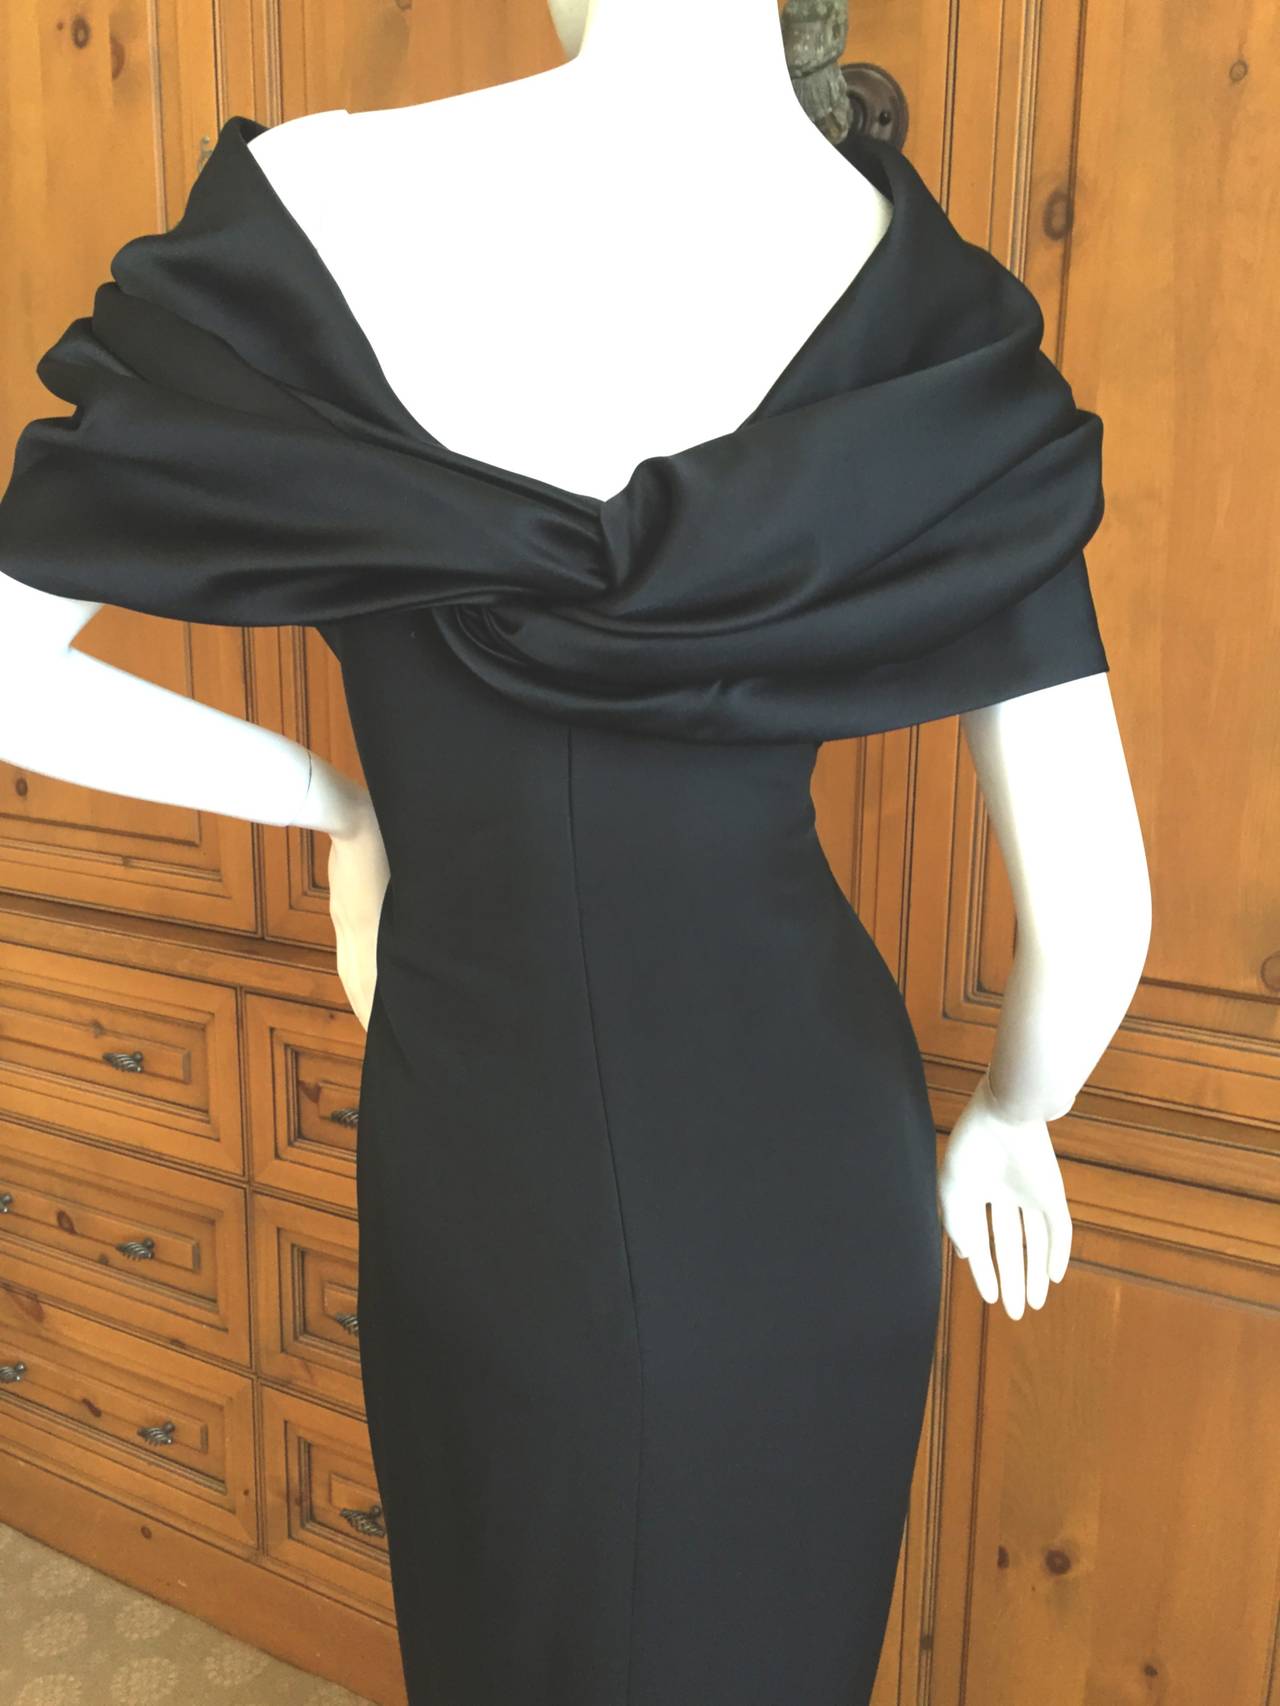 Women's Bill Blass Lovely 70's Black Sleeveless Dress with Attached Capelet / Stole